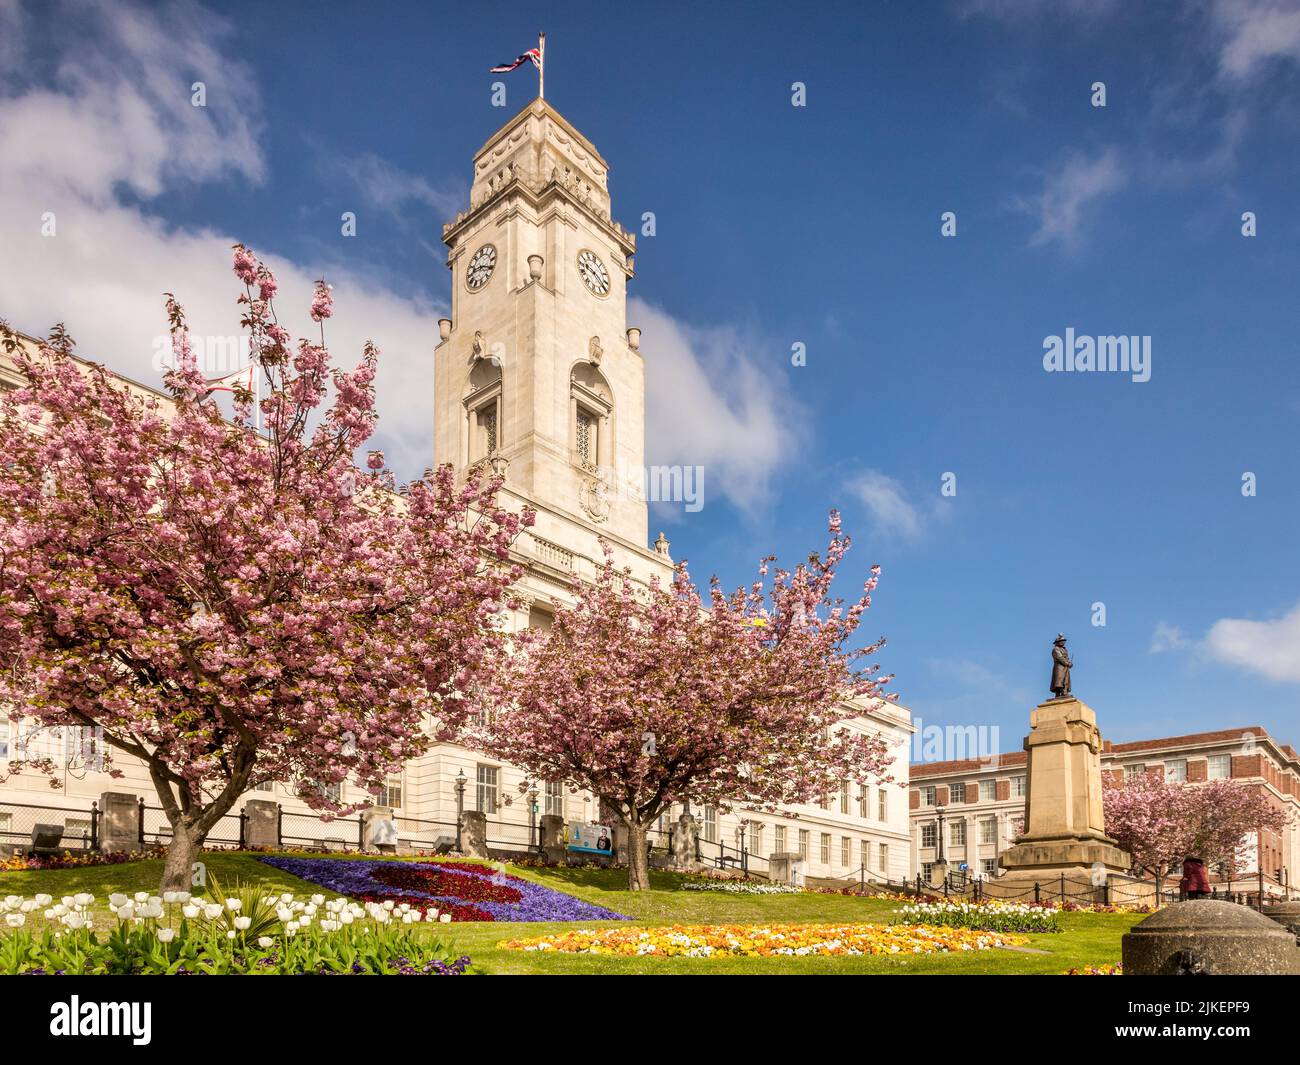 24 April 2022: Barnsley, South Yorkshire - Barnsley Town Hall on a fine spring day, with blue sky and gardens in bloom. Stock Photo